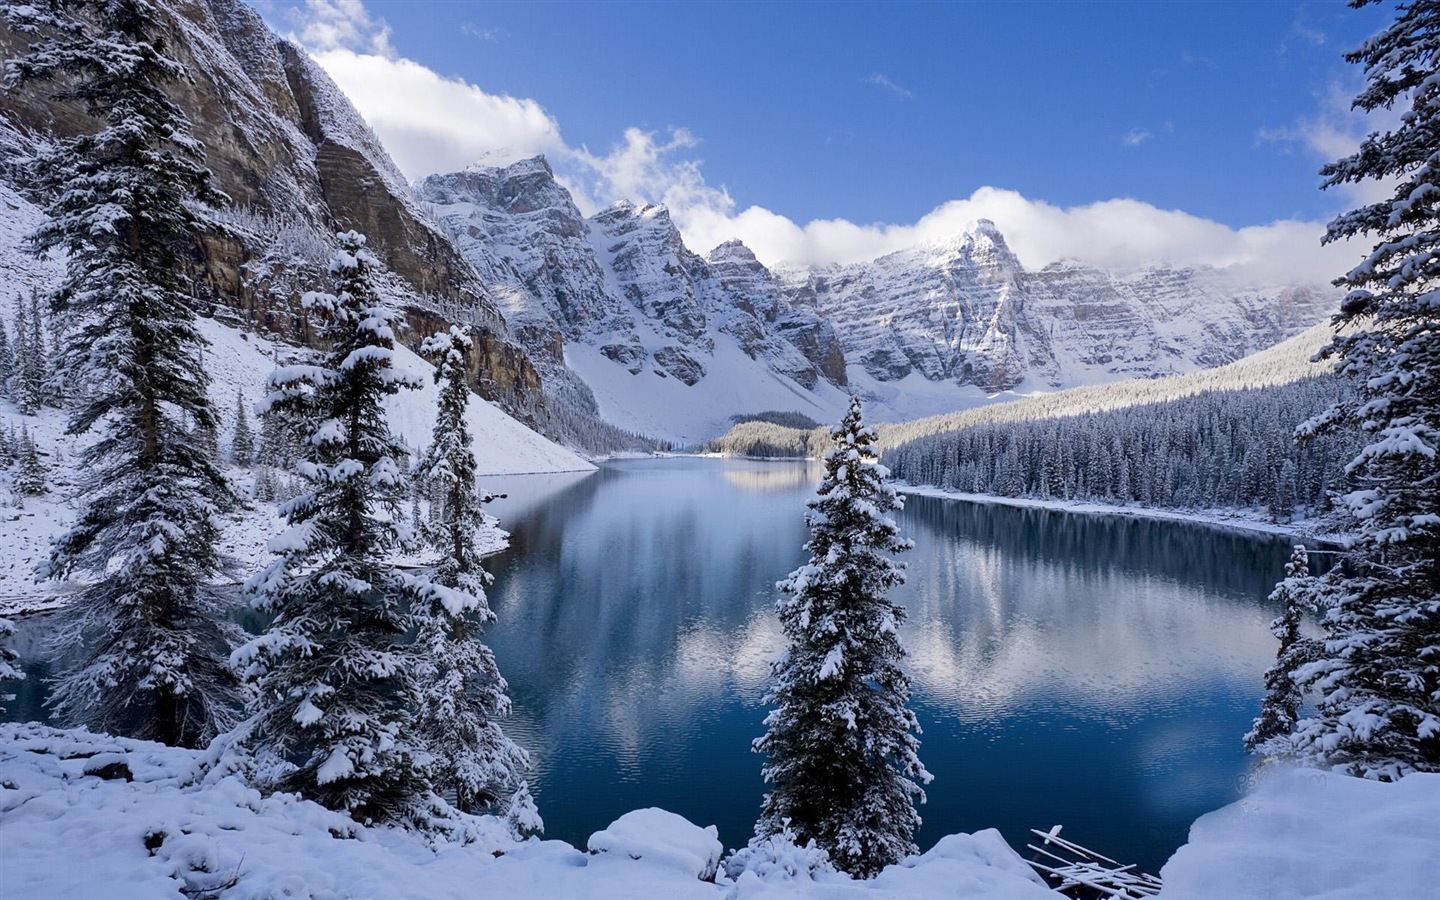 Winter, snow, mountains, lakes, trees, roads HD Wallpapers #12 - 1440x900